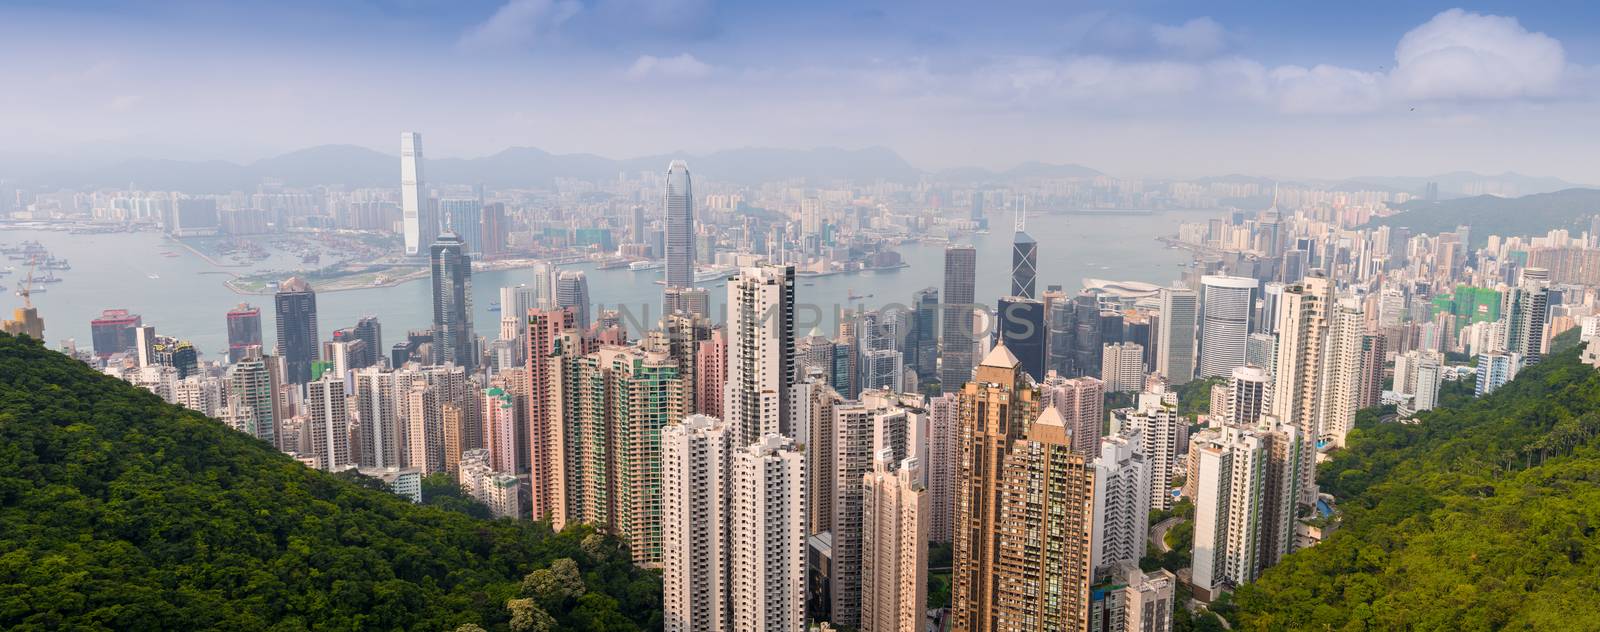 Panoramic view of Hong Kong cityscape on a beautiful sunny day by jovannig